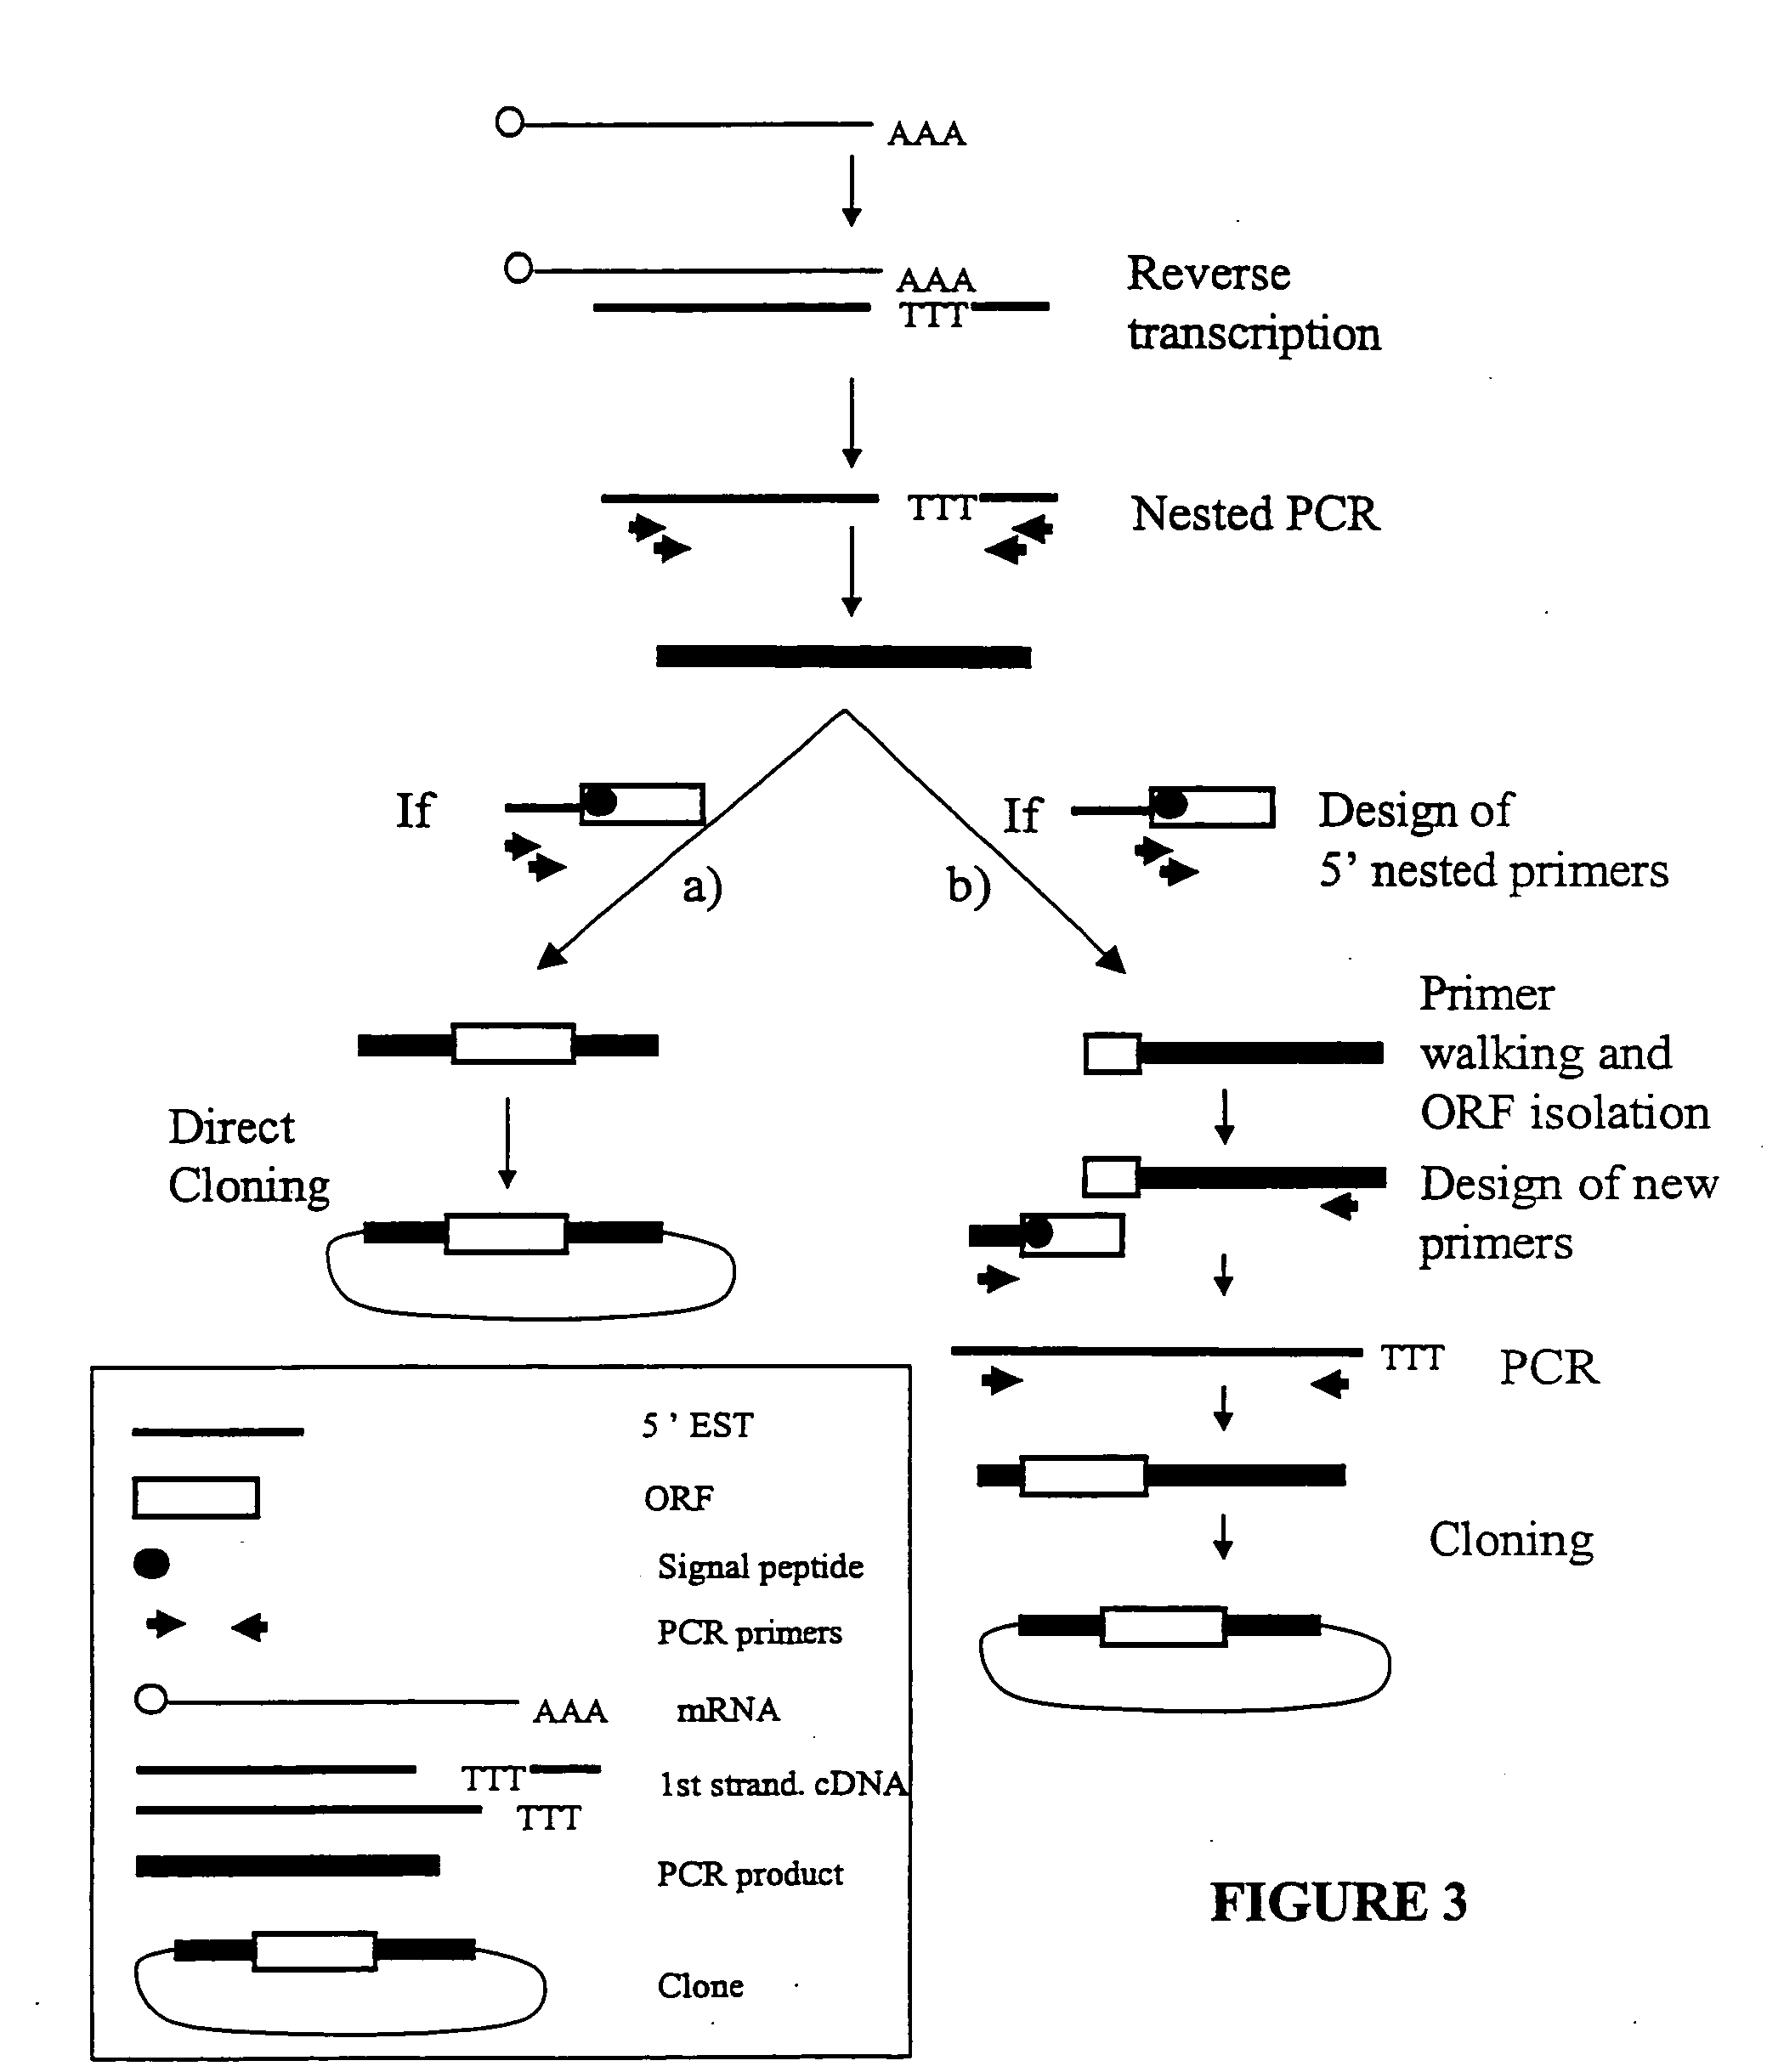 Expressed sequence tags and encoded human proteins